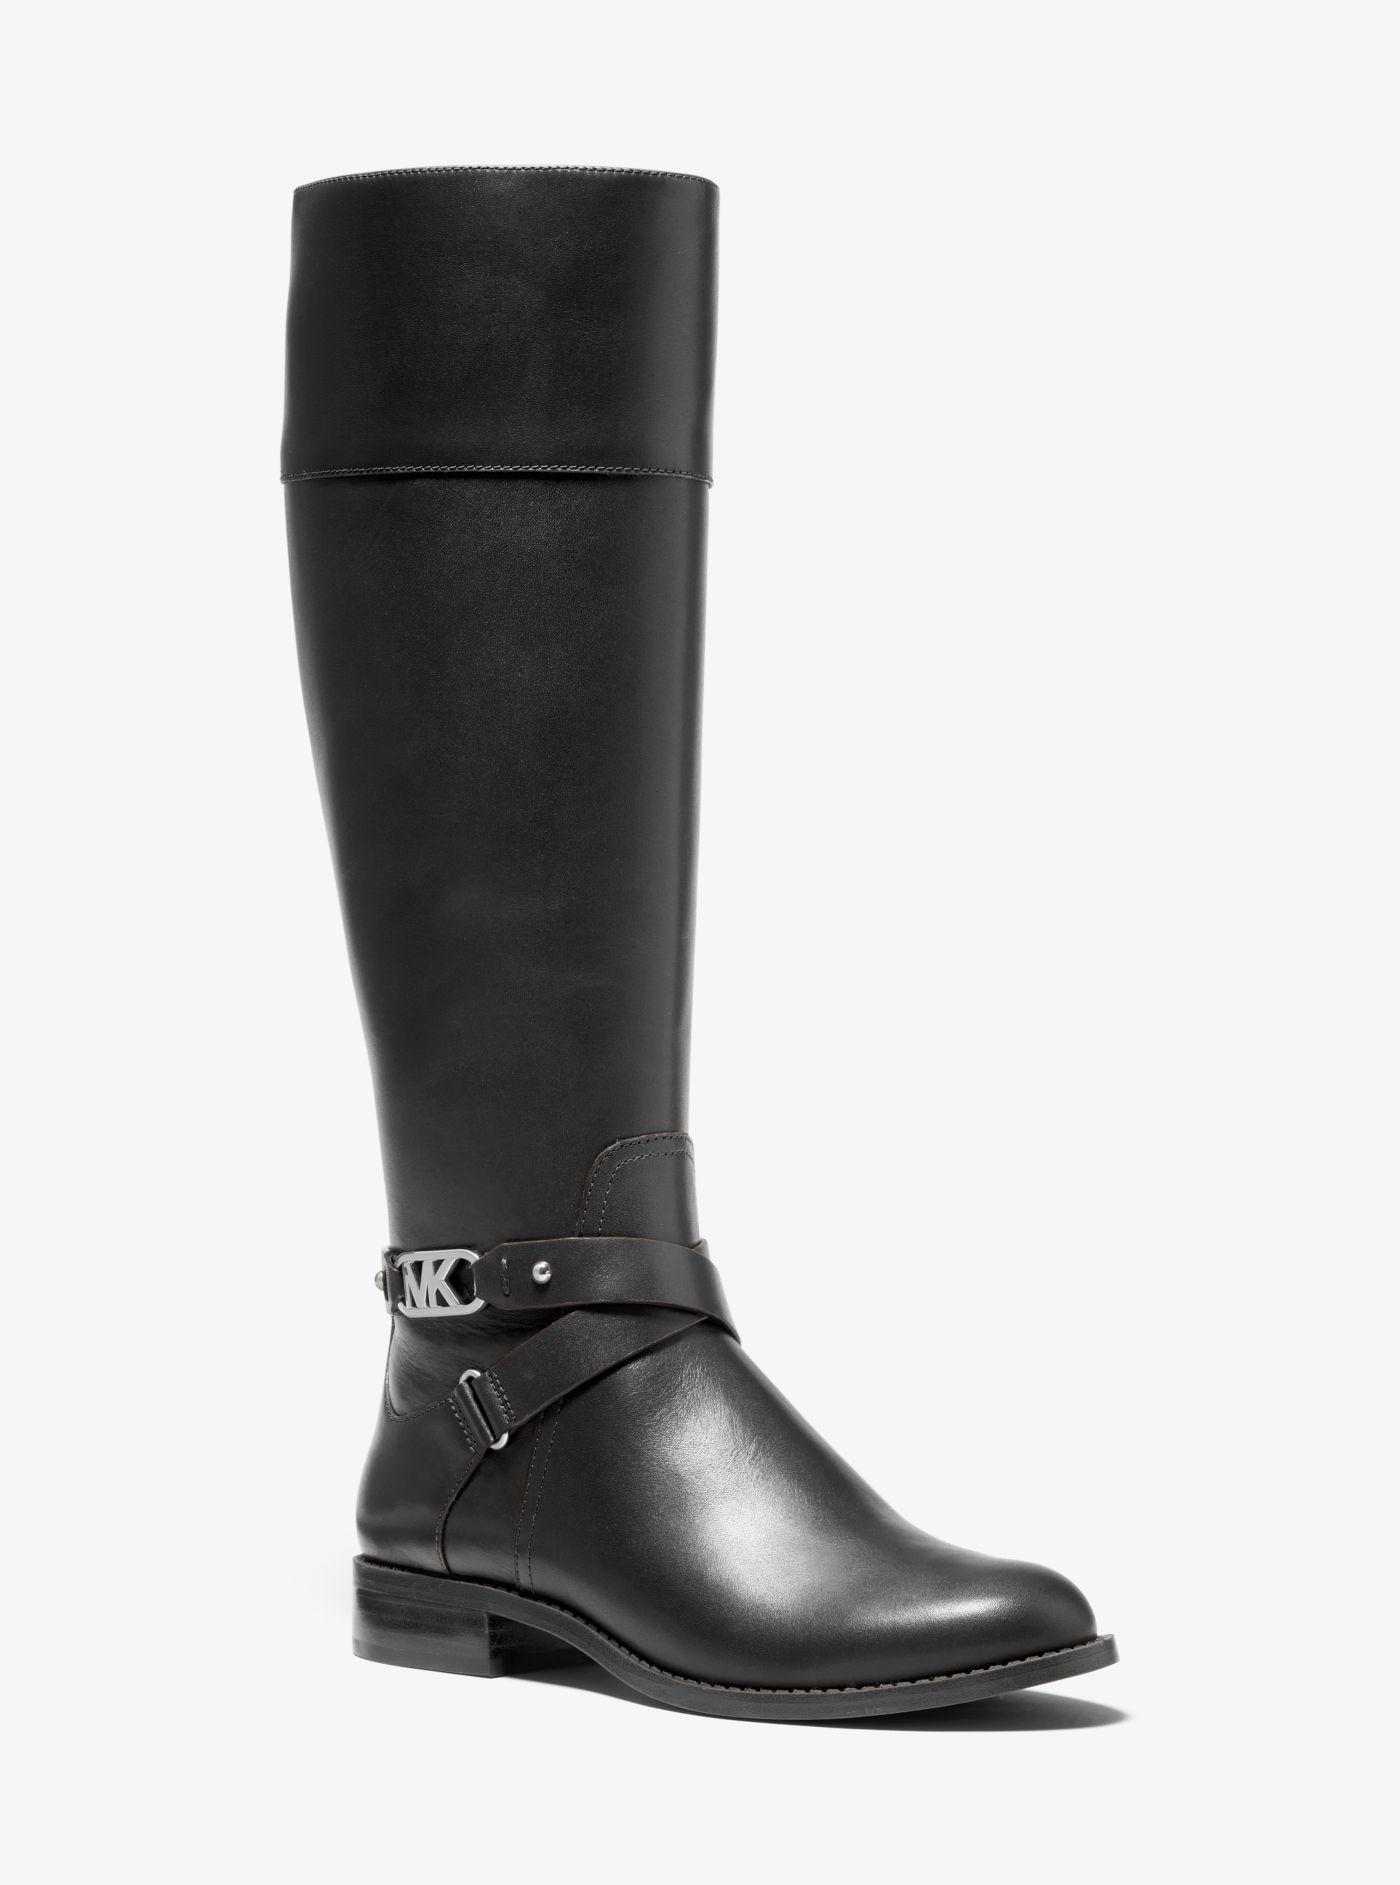 Michael Kors Kincaid Leather Riding Boot in Black | Lyst